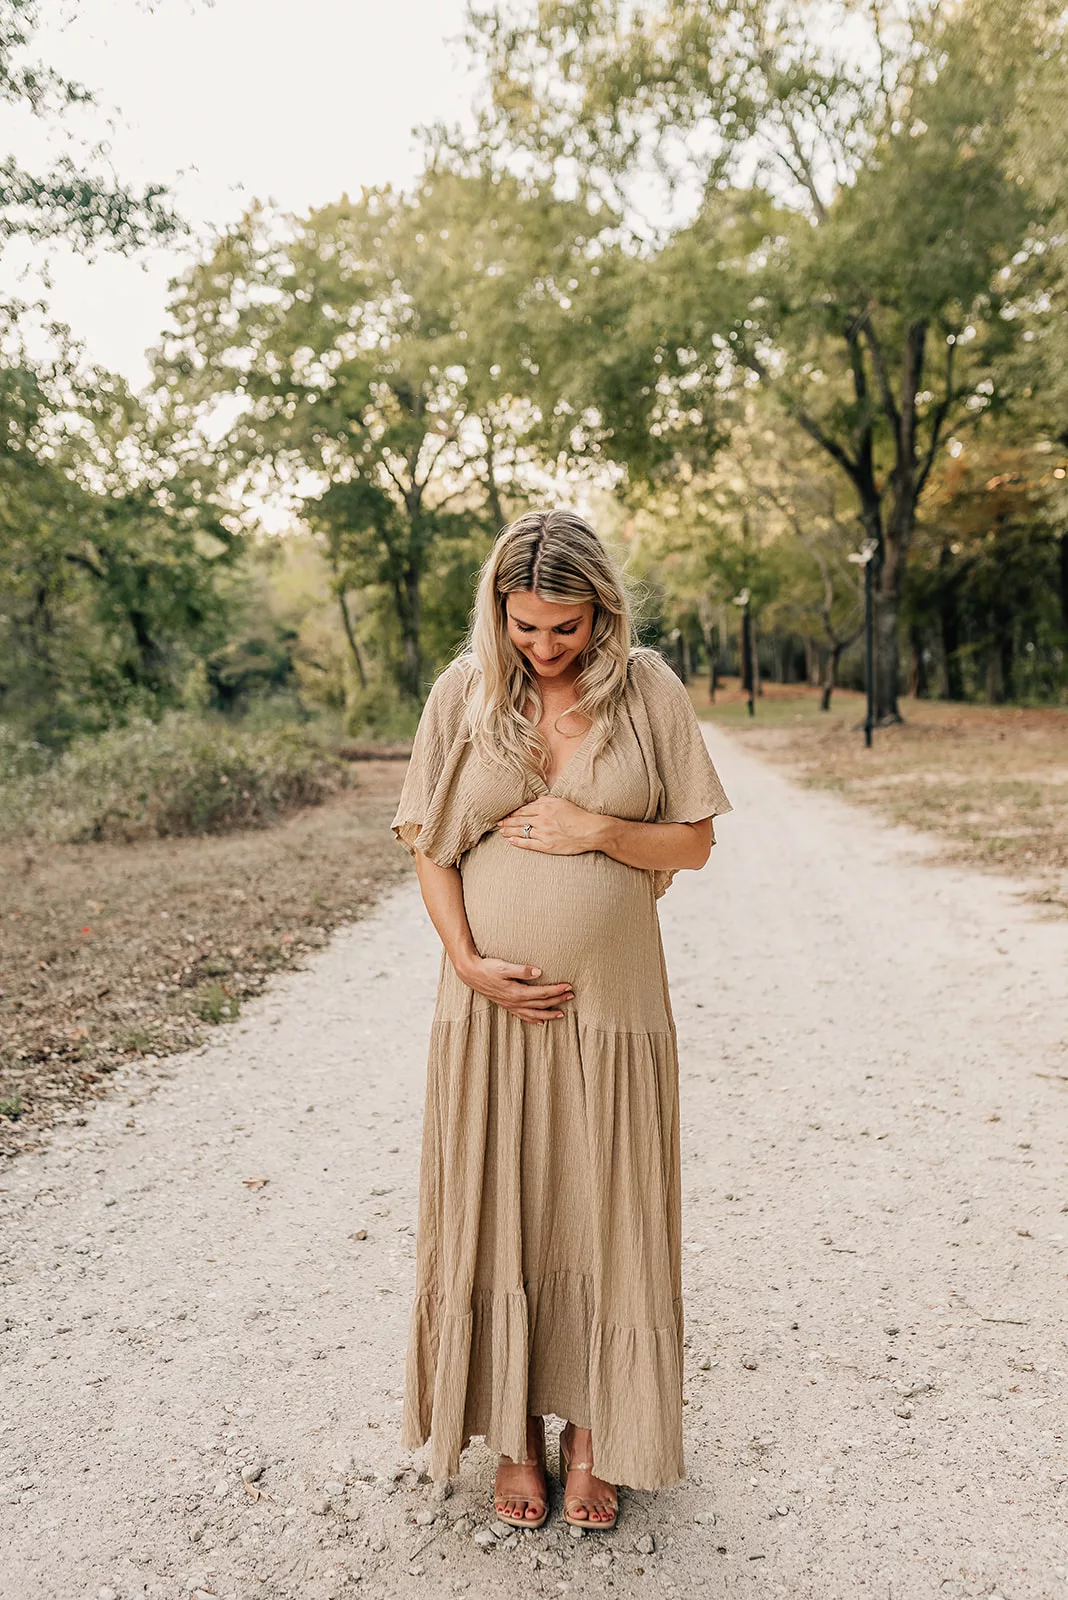 A mom to be stands in a park path smiling down to her bump in a tan dress after meeting with a Houston Postpartum Doula